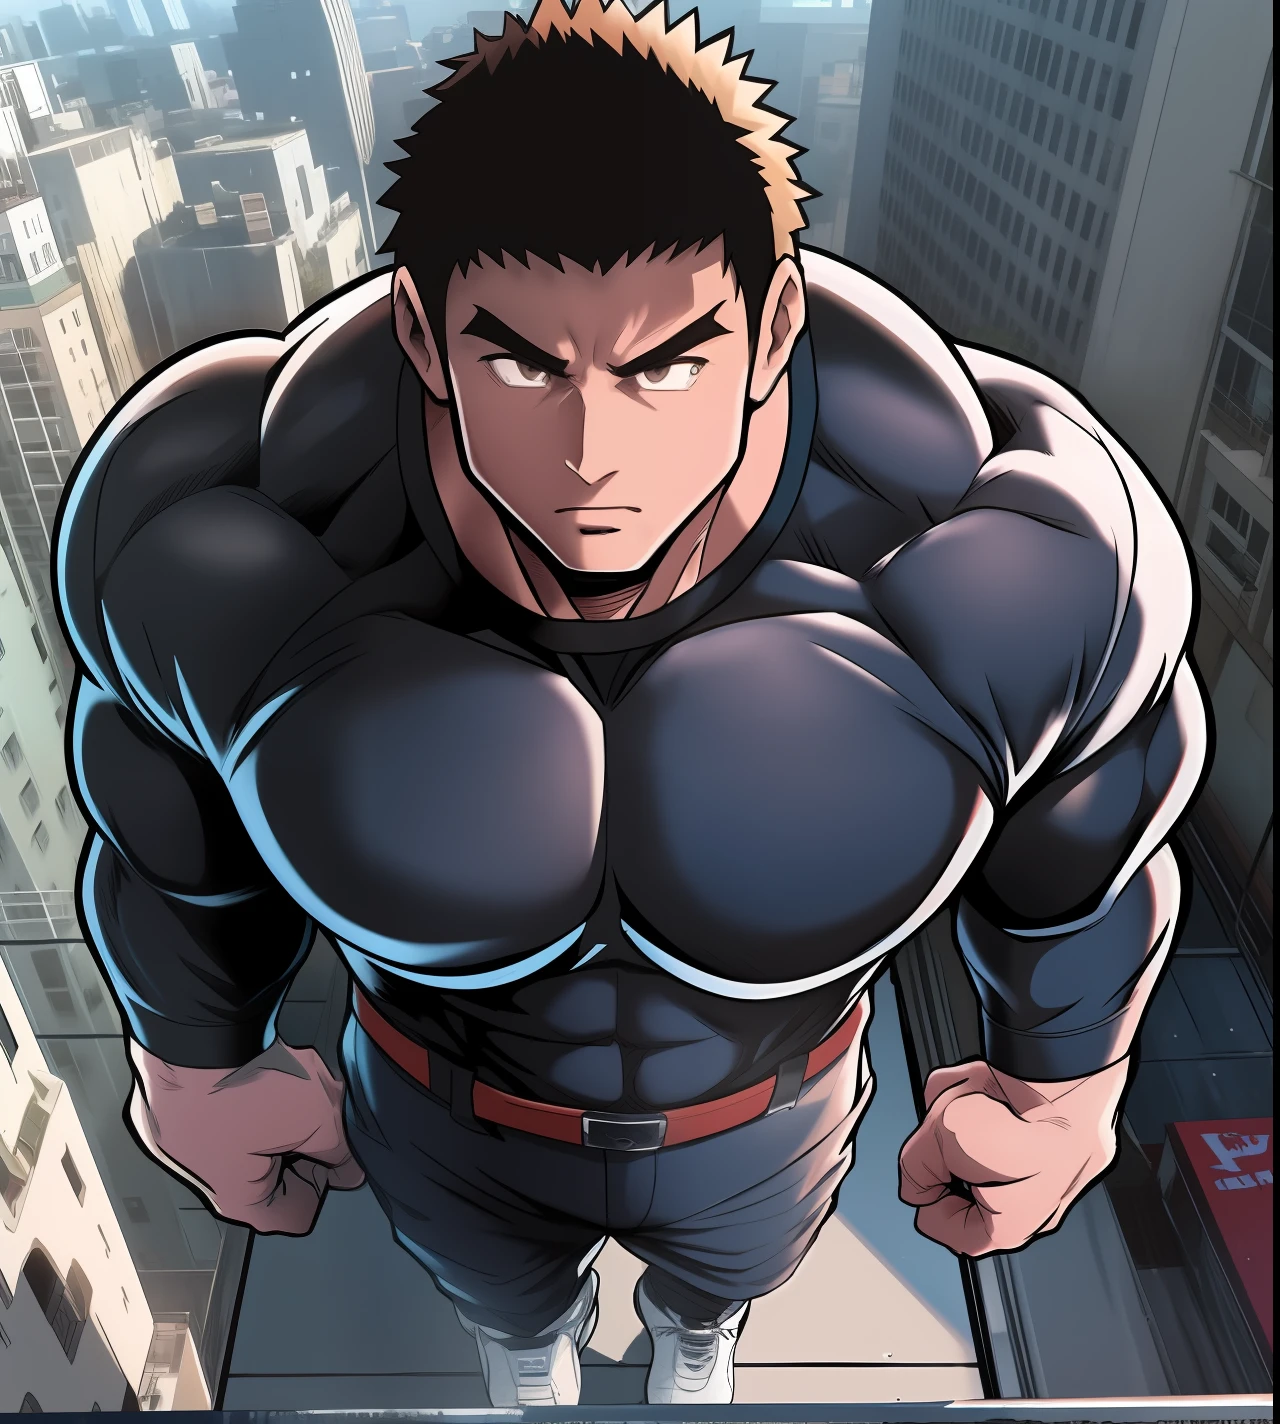 Generate anime-style art with a high-angle shot of a muscular male character with his body facing the camera, THE CHARACTER IS STANDING ON TOP OF A TALL BUILDING, The protagonist must have an extremely muscular body, very tall, similar to that of a bodybuilder. The character must have very short hair with dark brown bangs and must be wearing a red long sleeve T-shirt with black pants and a belt and must be wearing a white sneaker. The image should depict the character's entire body, focusing on his intimidating posture. The protagonist must exude strength and dominance, displaying a powerful presence. The scene should feature only the muscular character, THE CHARACTER SHOULD BE ON TOP OF A BUILDING SHOWING A LARGE CITY BELOW HIM